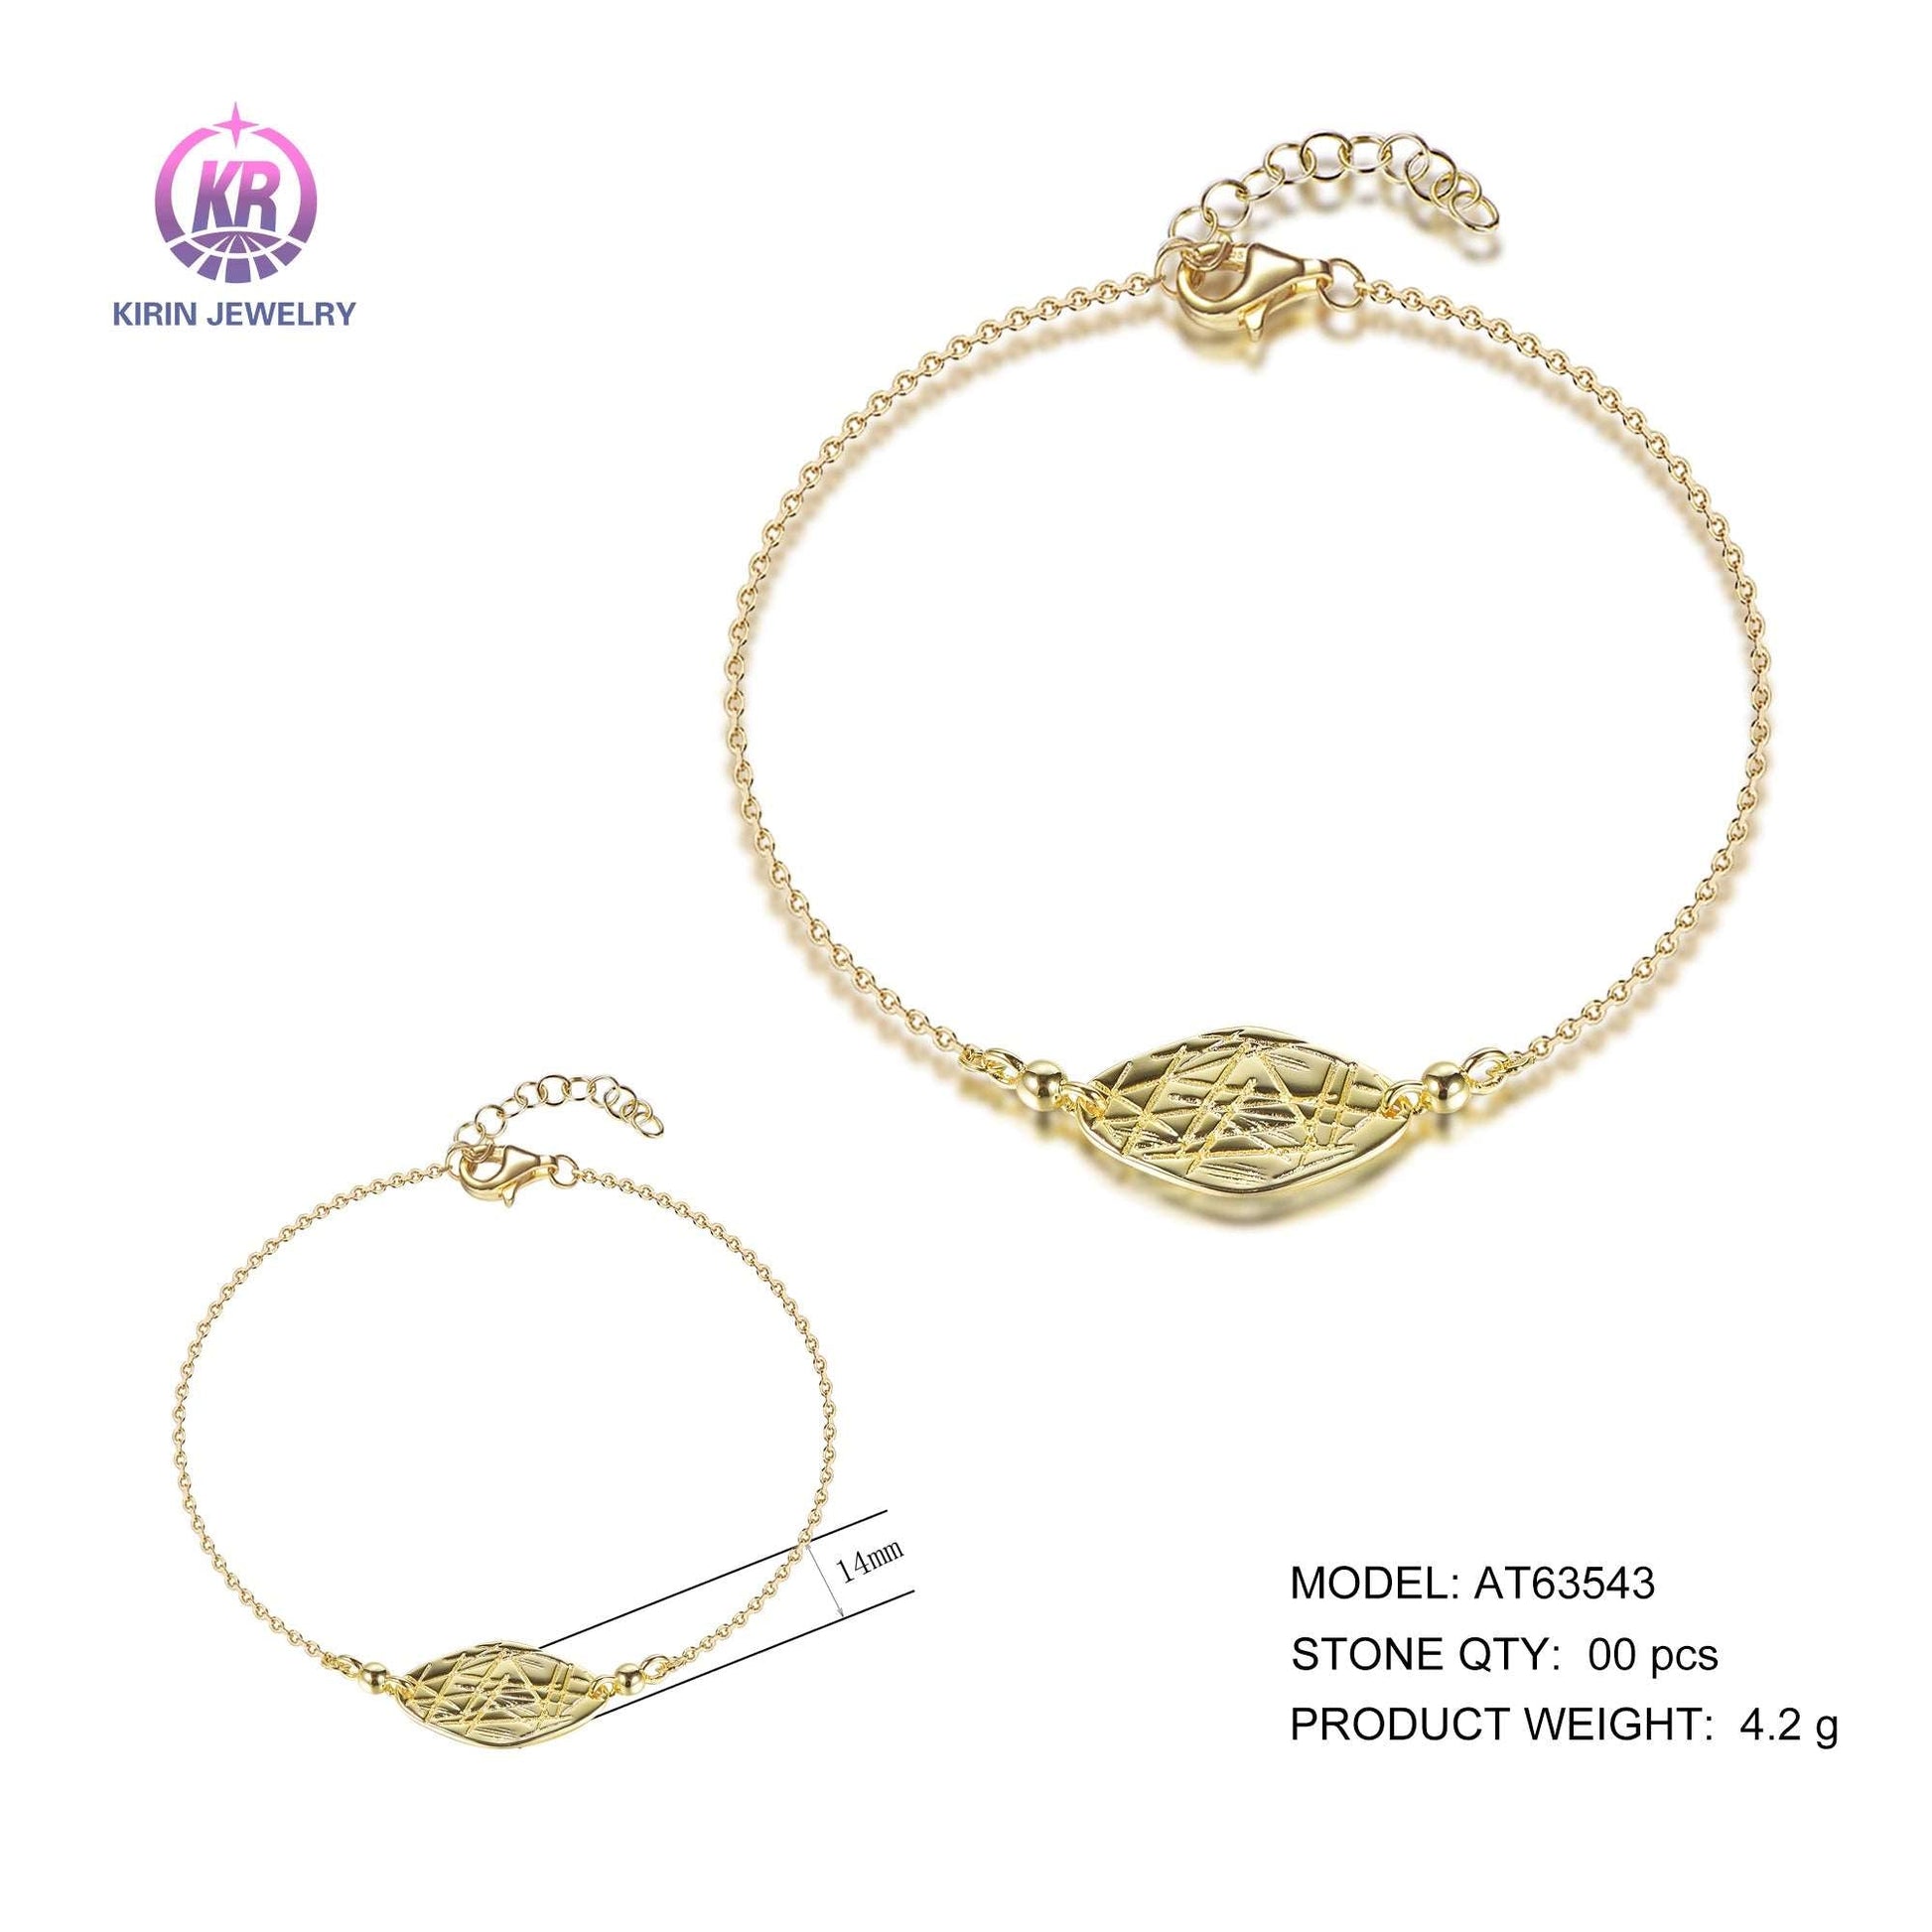 925 silver bracelet with 14K gold plating AT63543 Kirin Jewelry